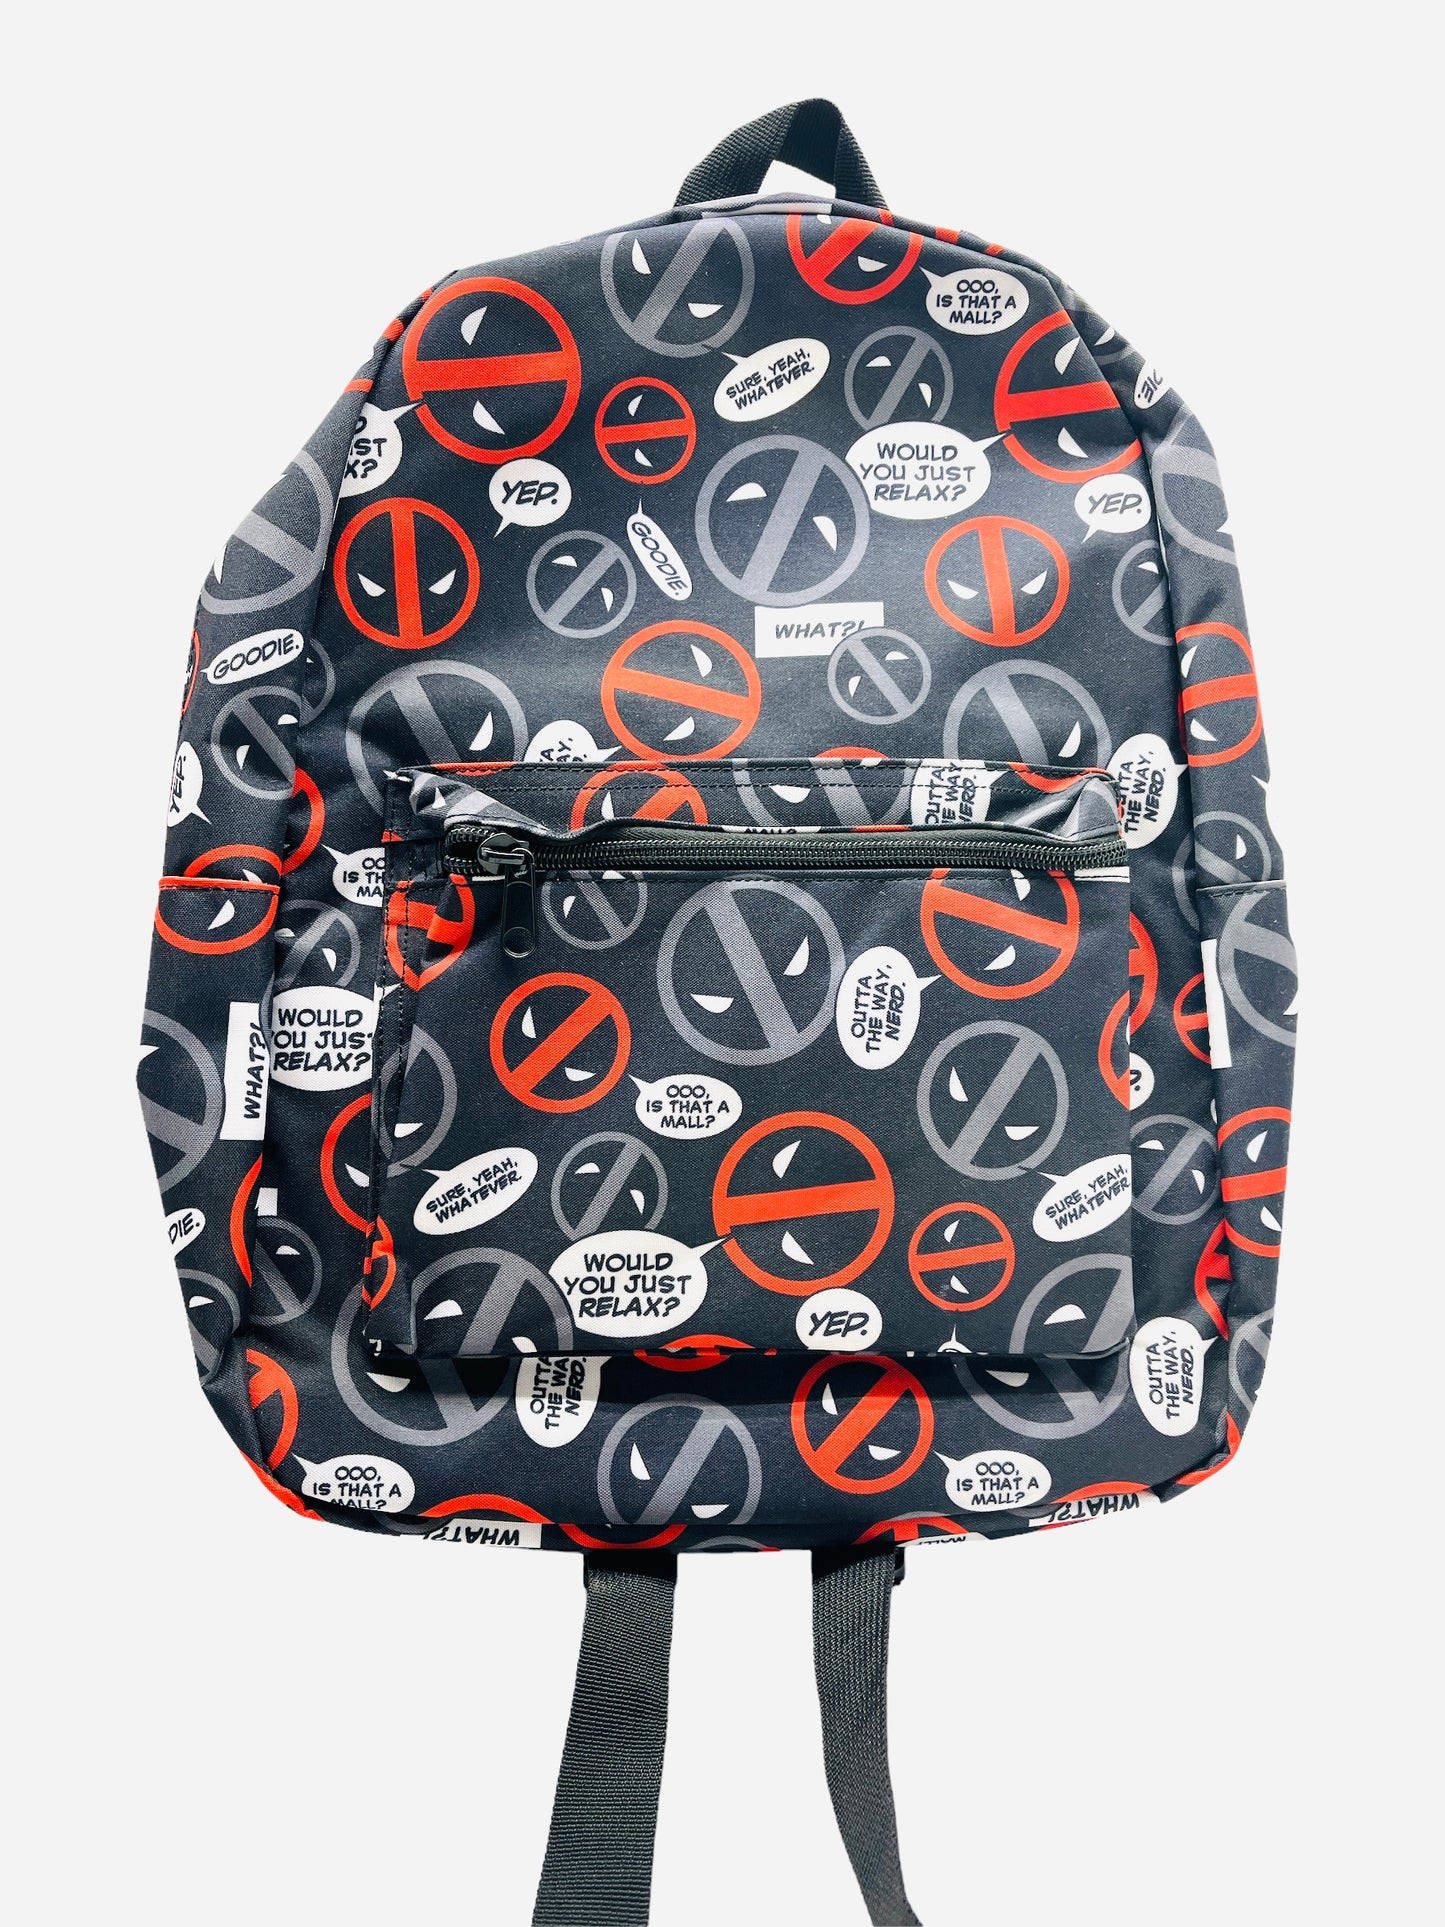 Deadpool Thoughts Backpack 14" x 17"